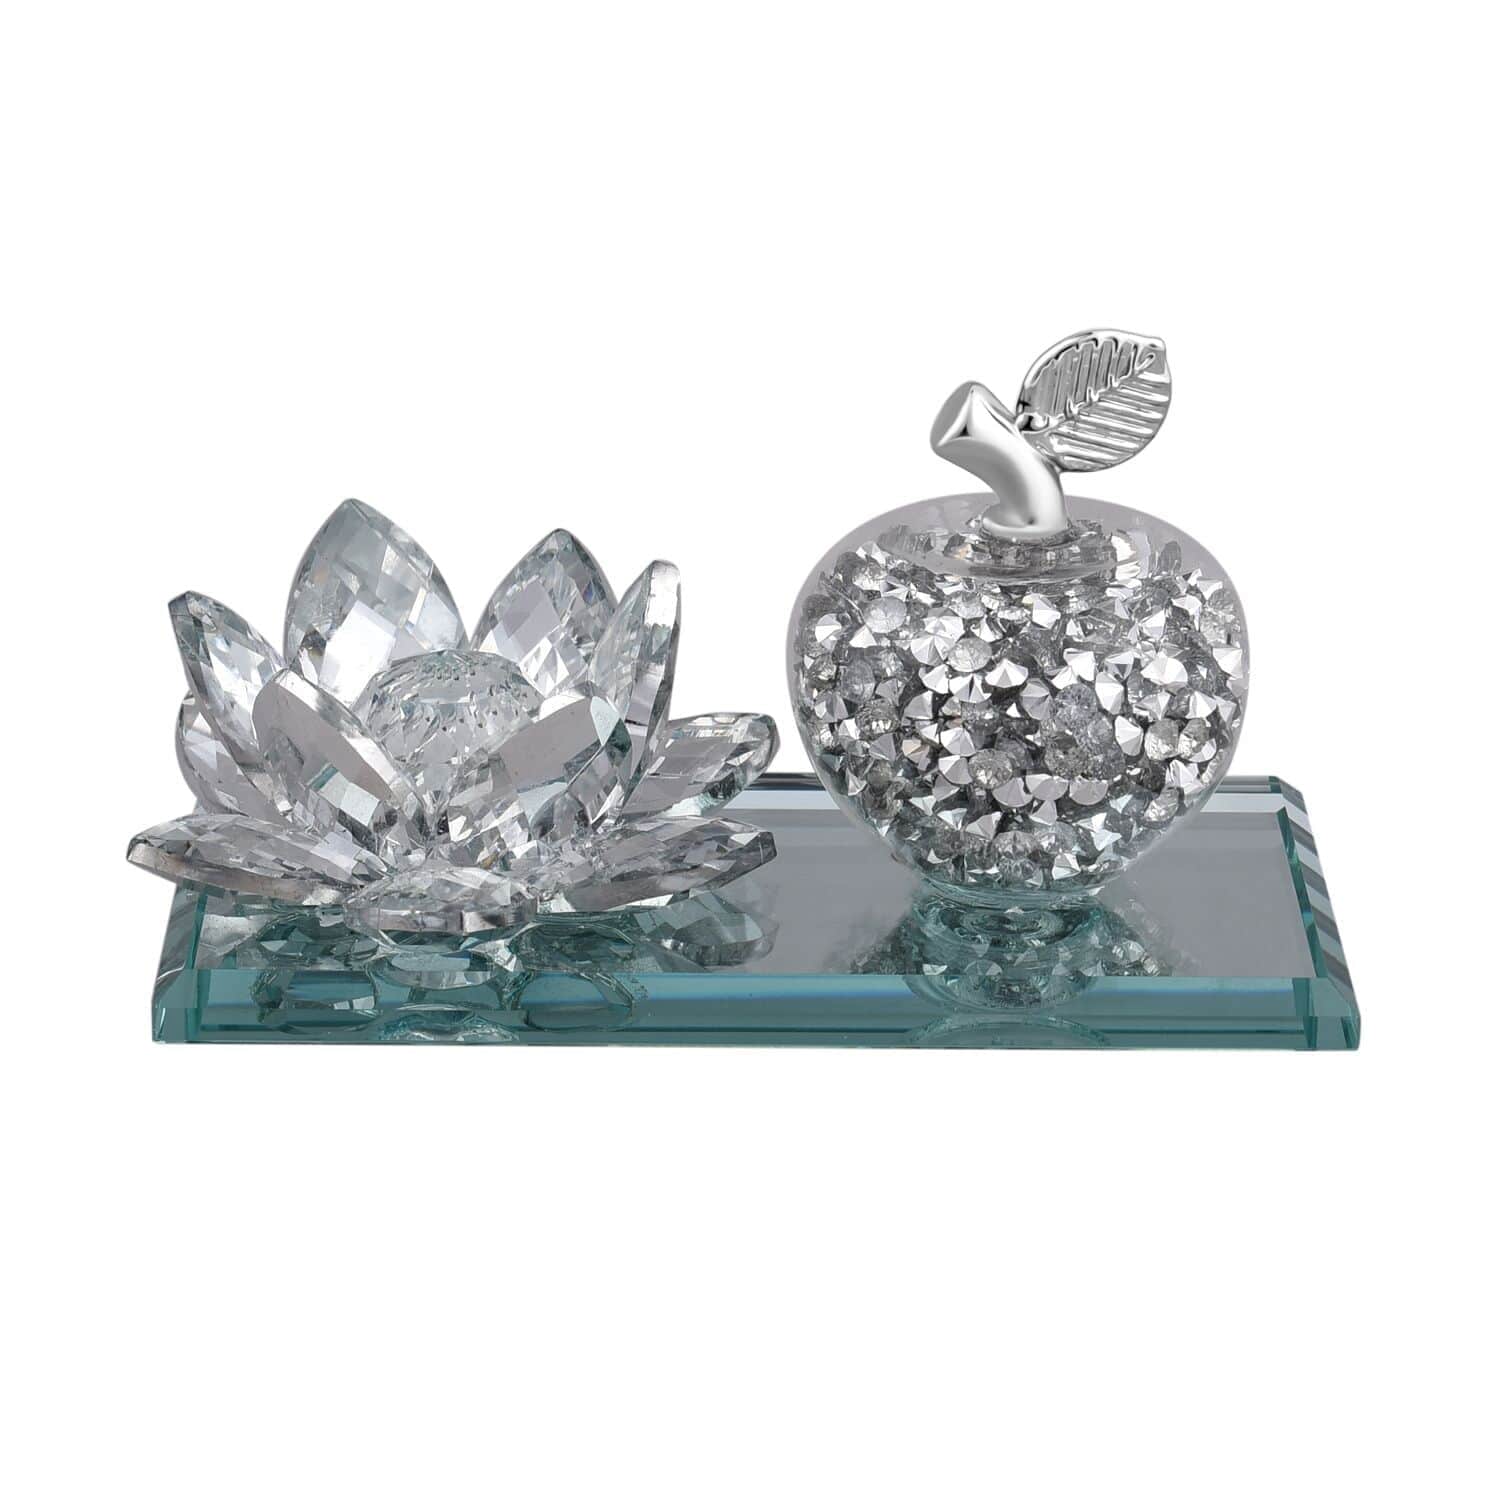 Shop LC Apple Lotus Crystal Candle Holder Home Decorative - 4.92 X 2.76 X 2.36 Inches